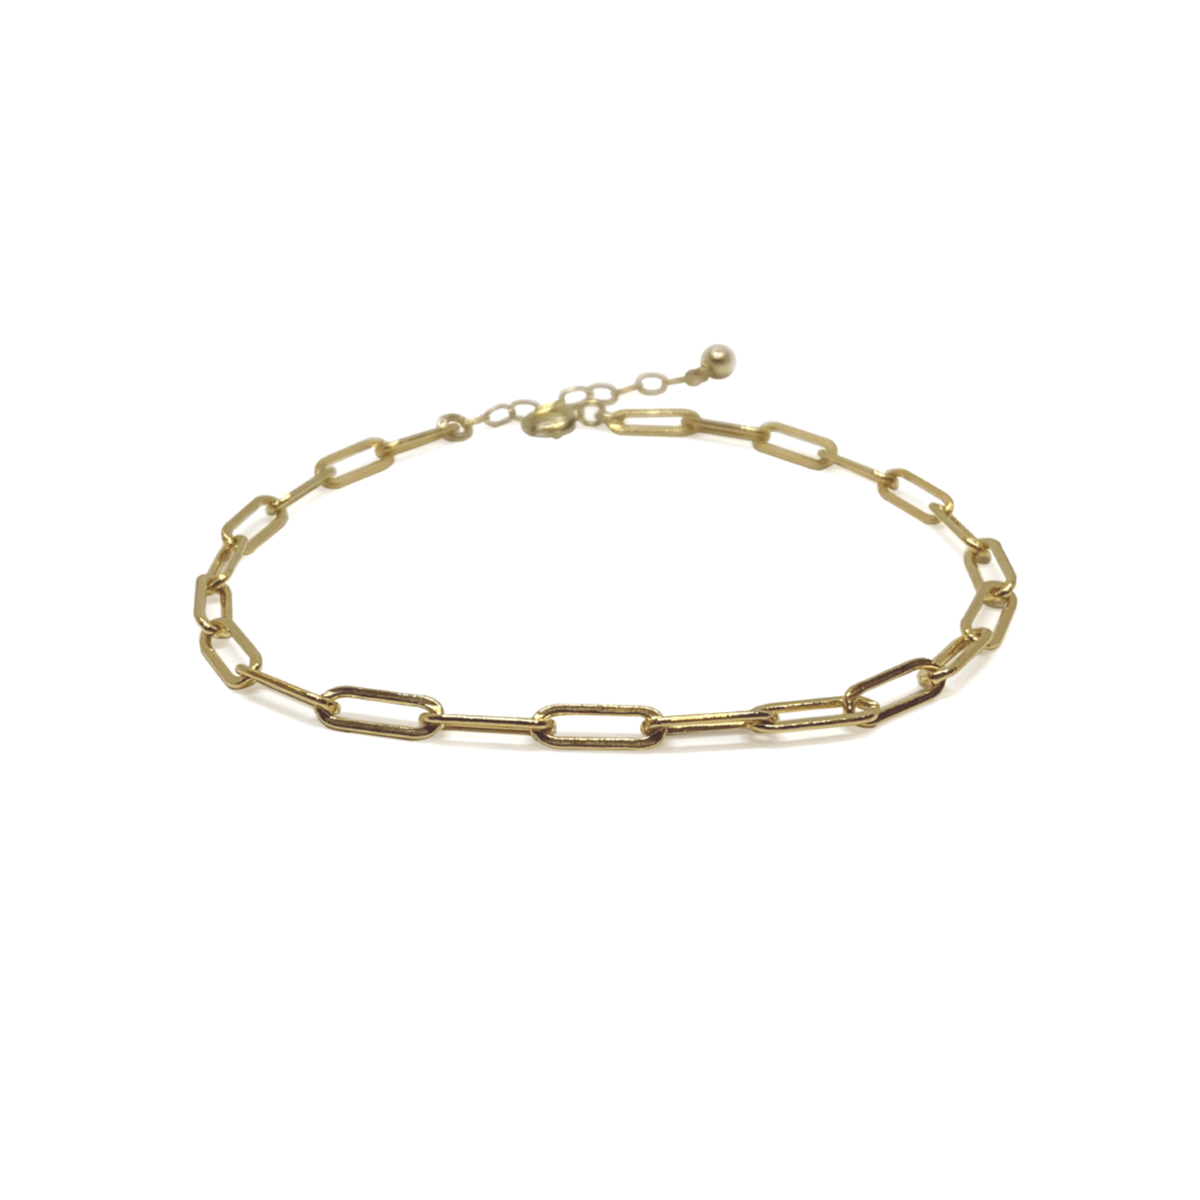 Paperclip Chain Summer Anklet - Gold/Silver - The Smart Minimalist